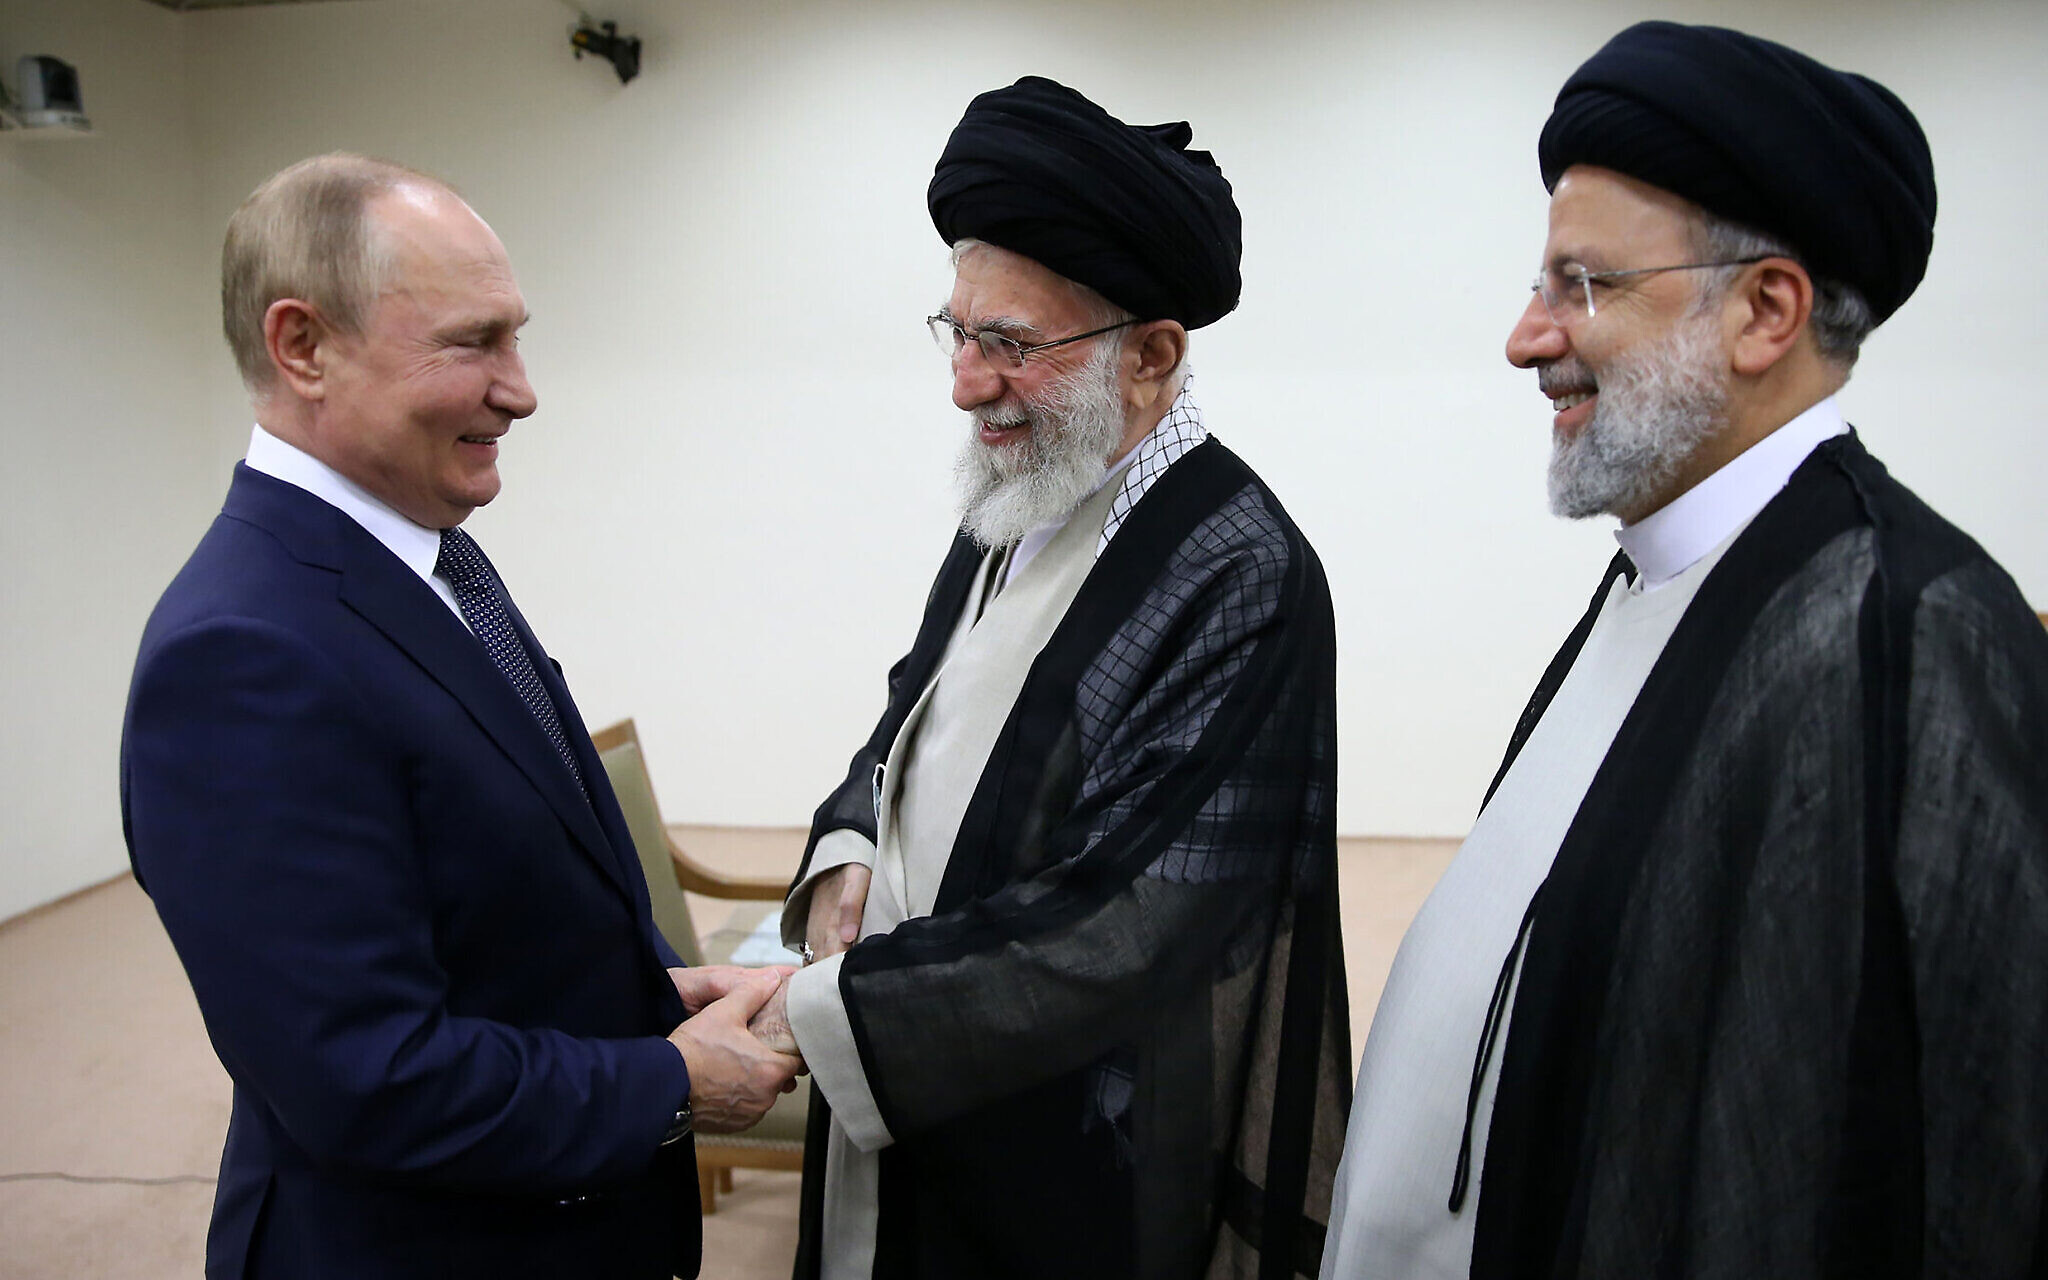 Isolated by West, Putin arrives in Tehran to deepen Russia-Iran relations | The Times of Israel